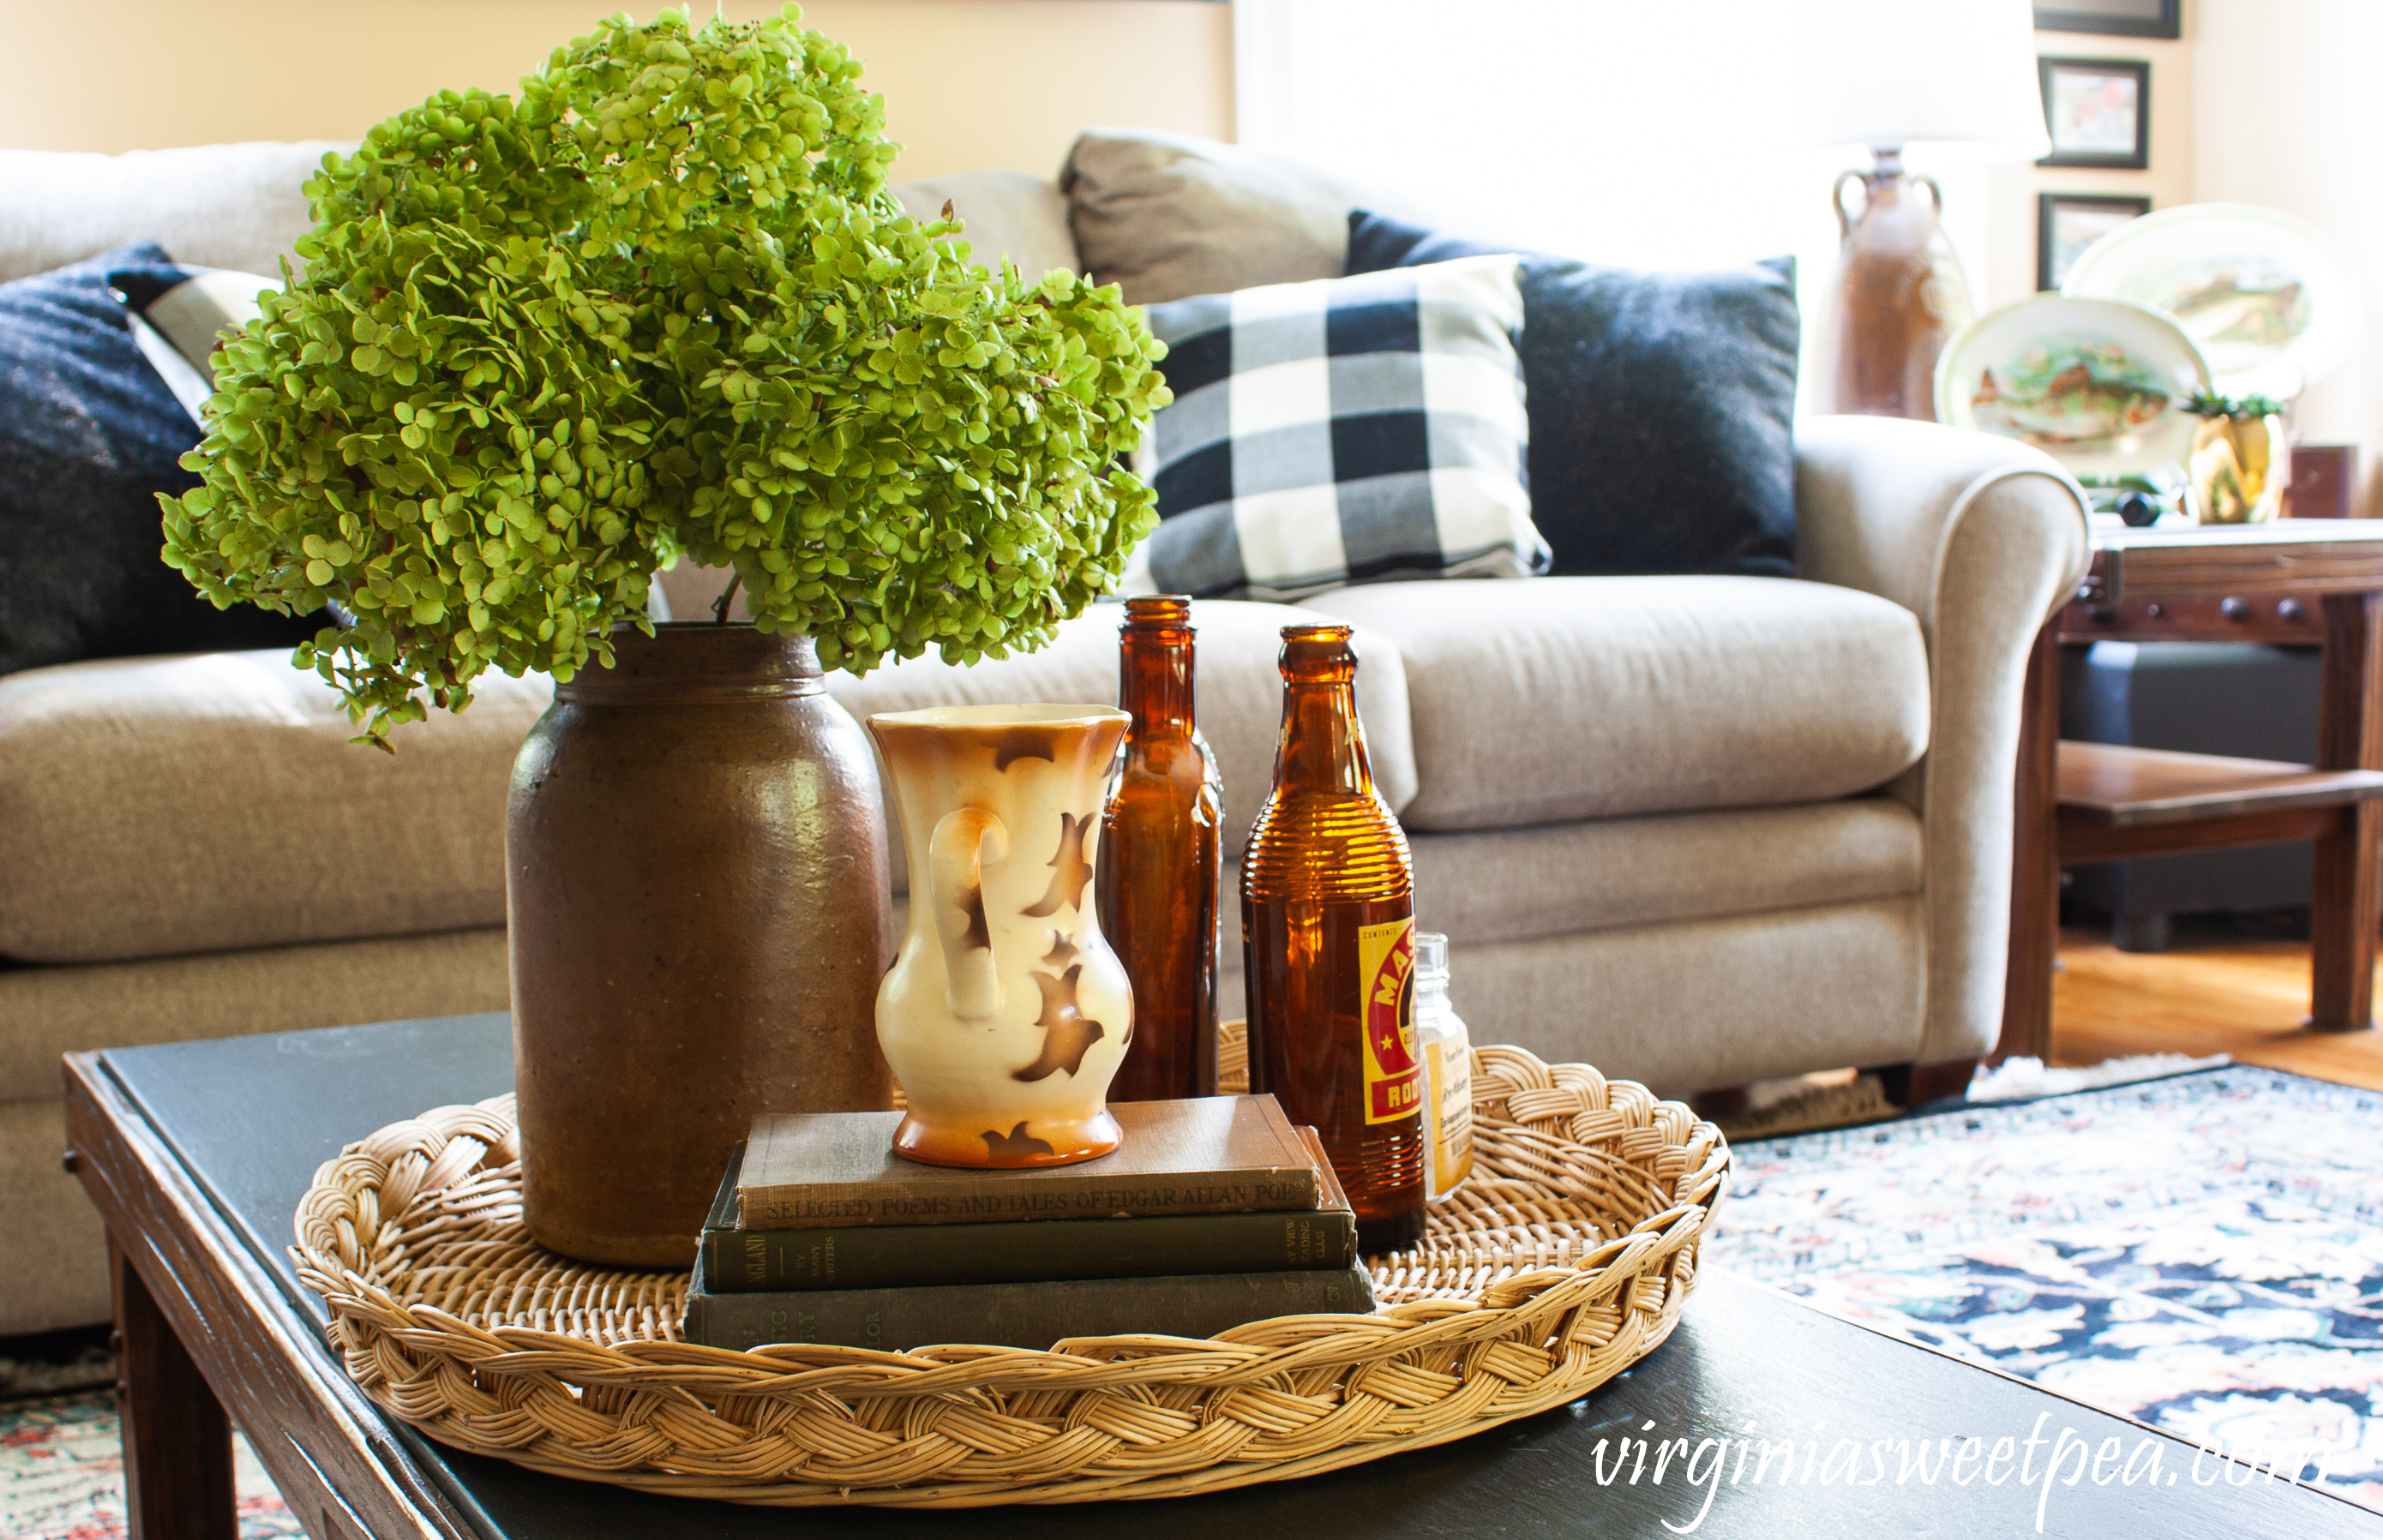 Early Fall coffee table vignette with Hydrangea in an antique crock, vintage bottles and books, and a vintage Czechoslovakian vase.